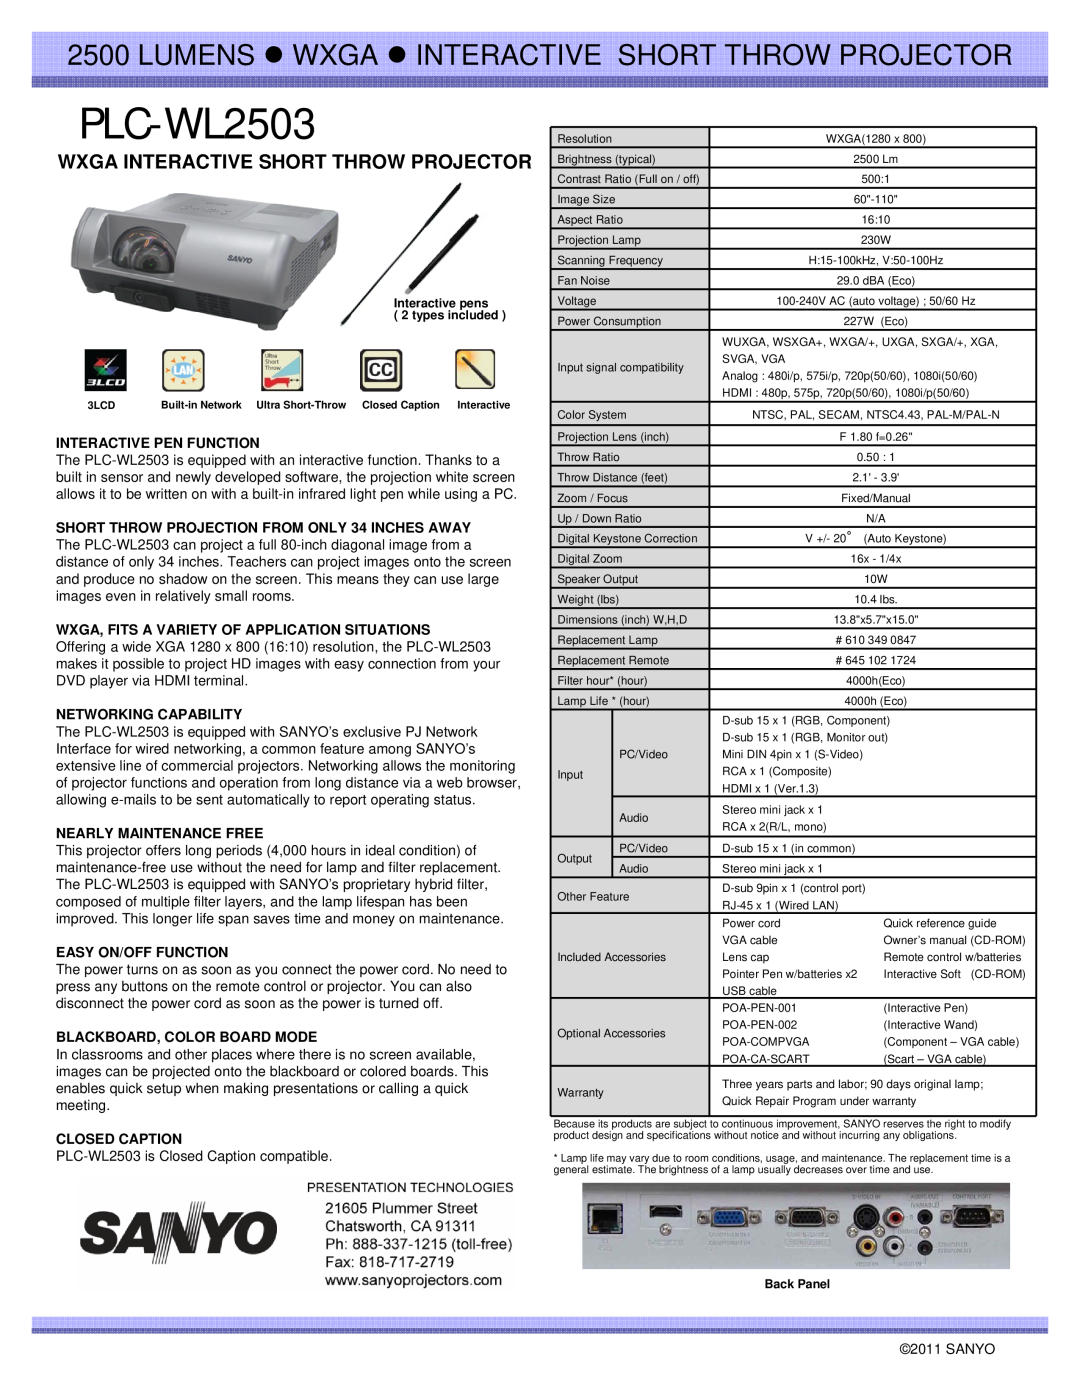 Sanyo PLC-WL2503 specifications Wxga Interactive Short Throw Projector, Interactive Pen Function, Networking Capability 